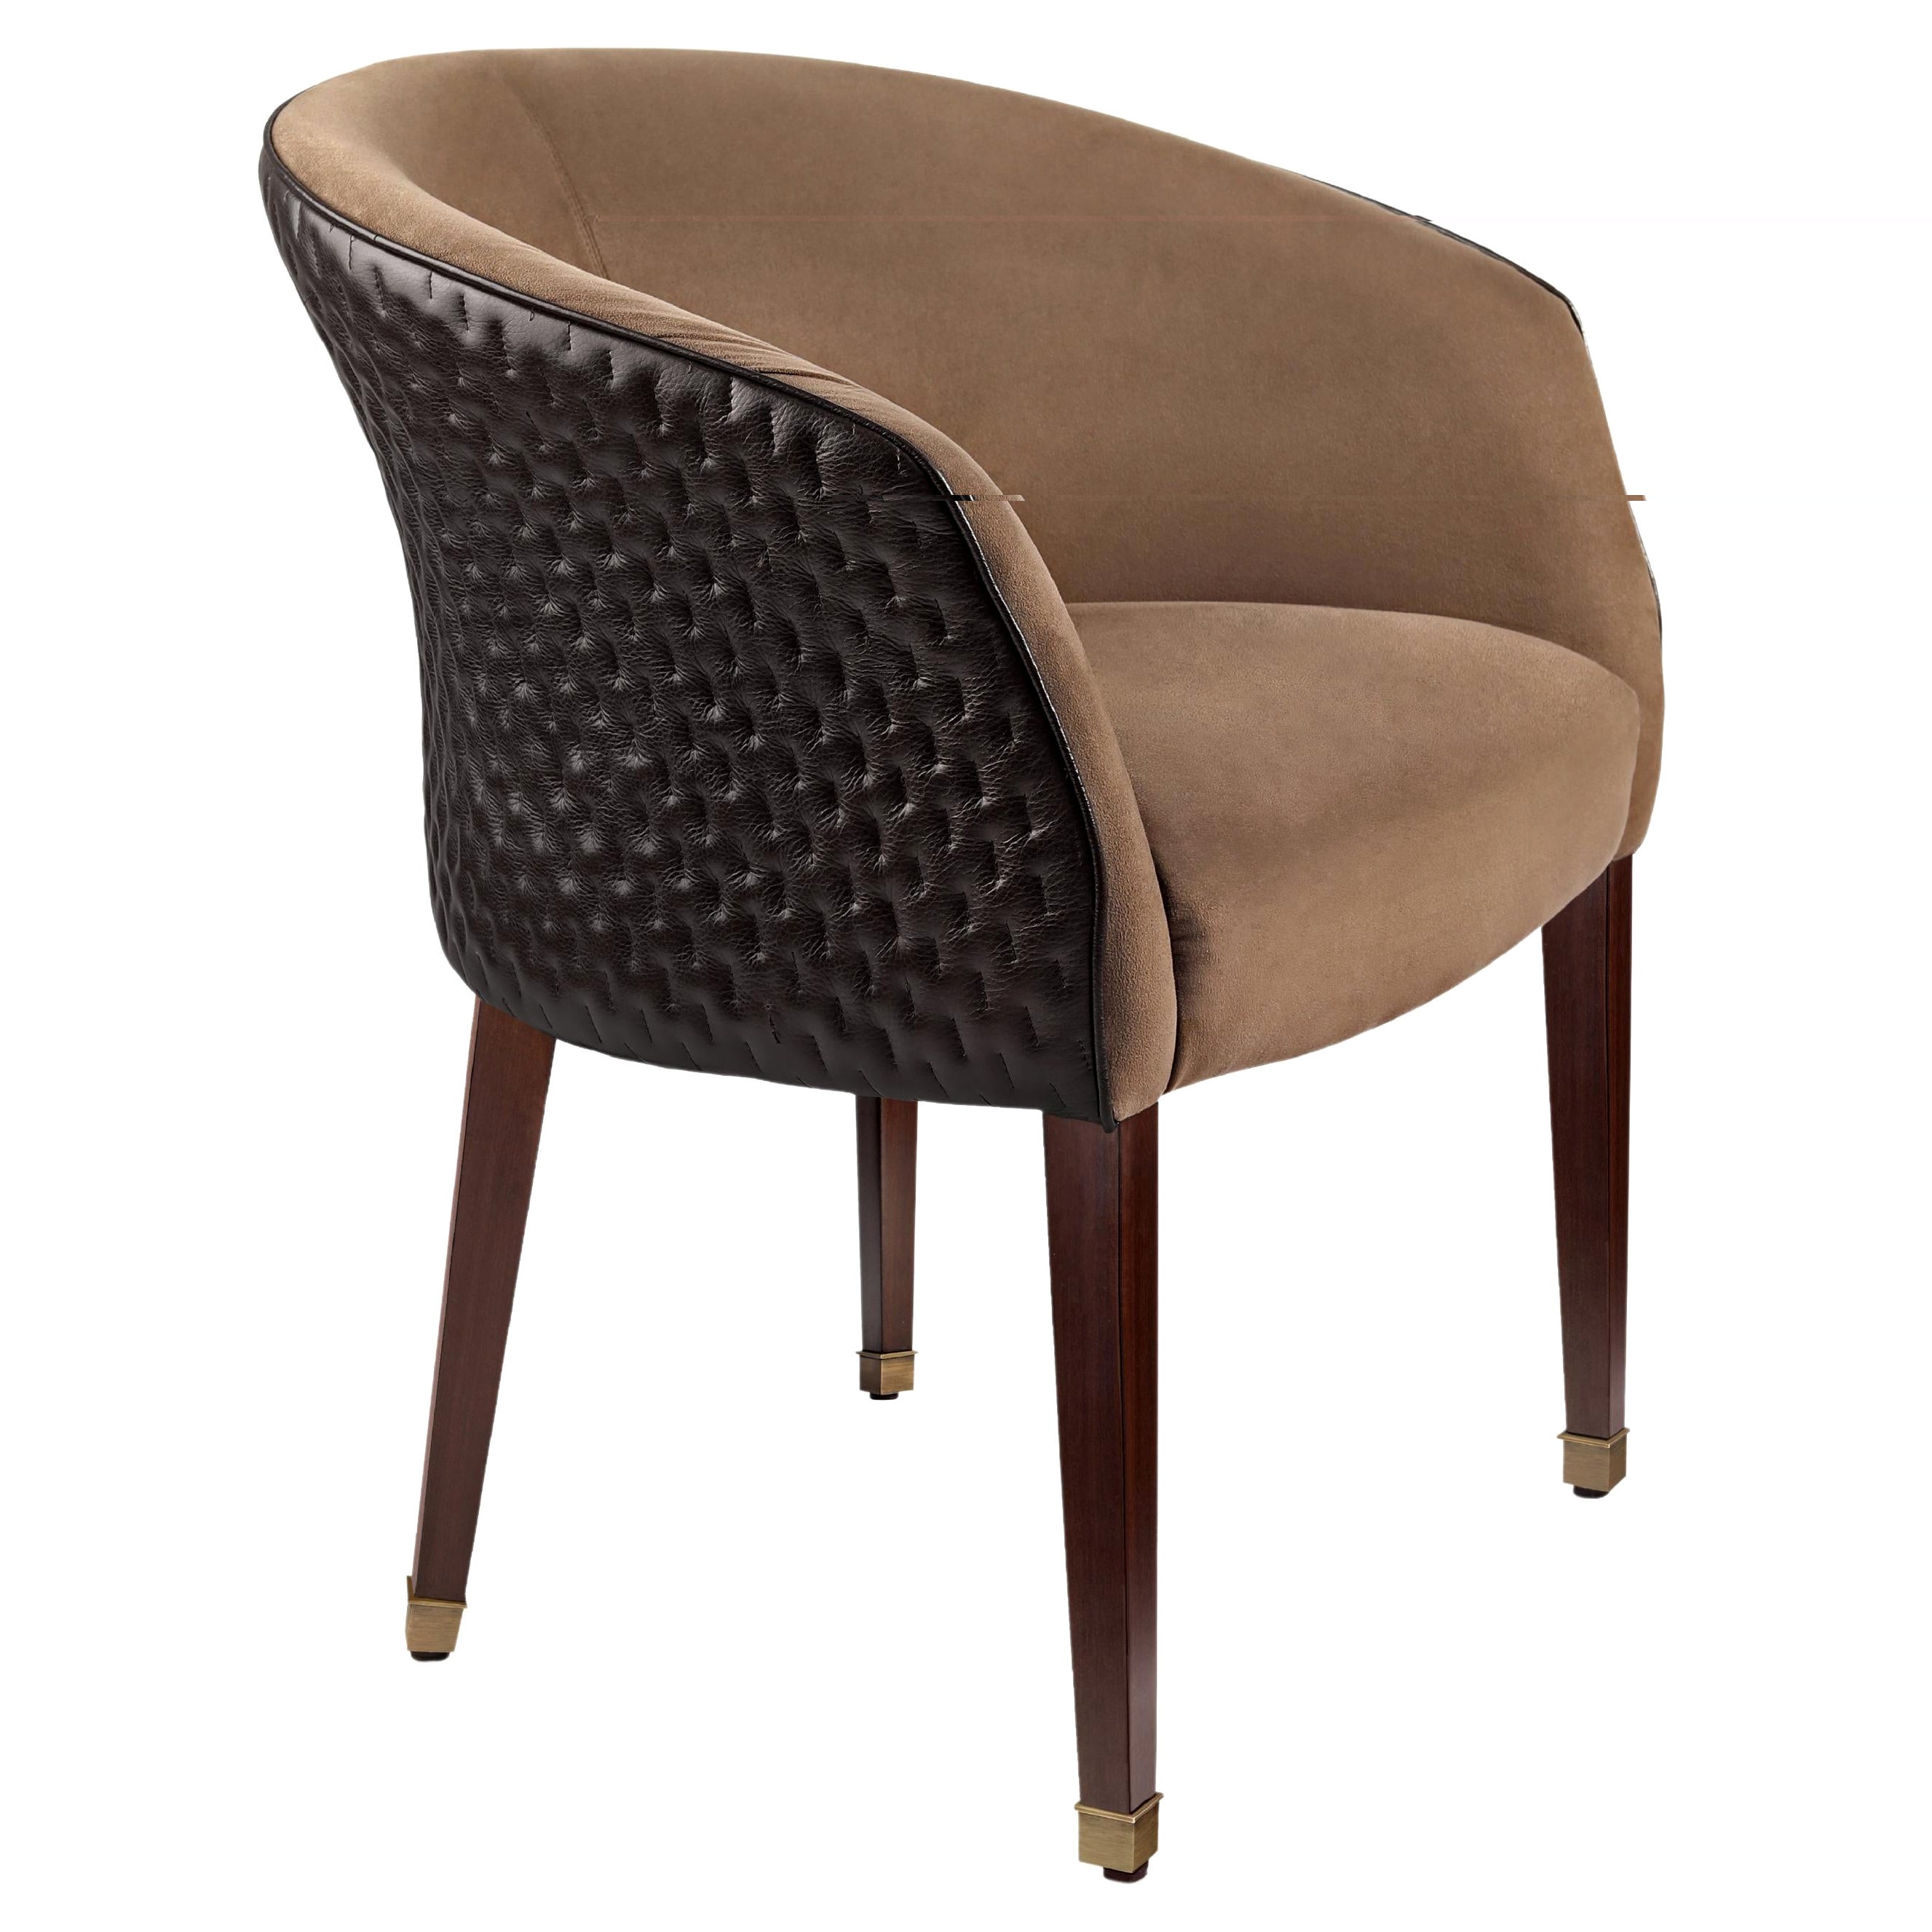 Hand Stitched Leather Marla Armchair by Madheke